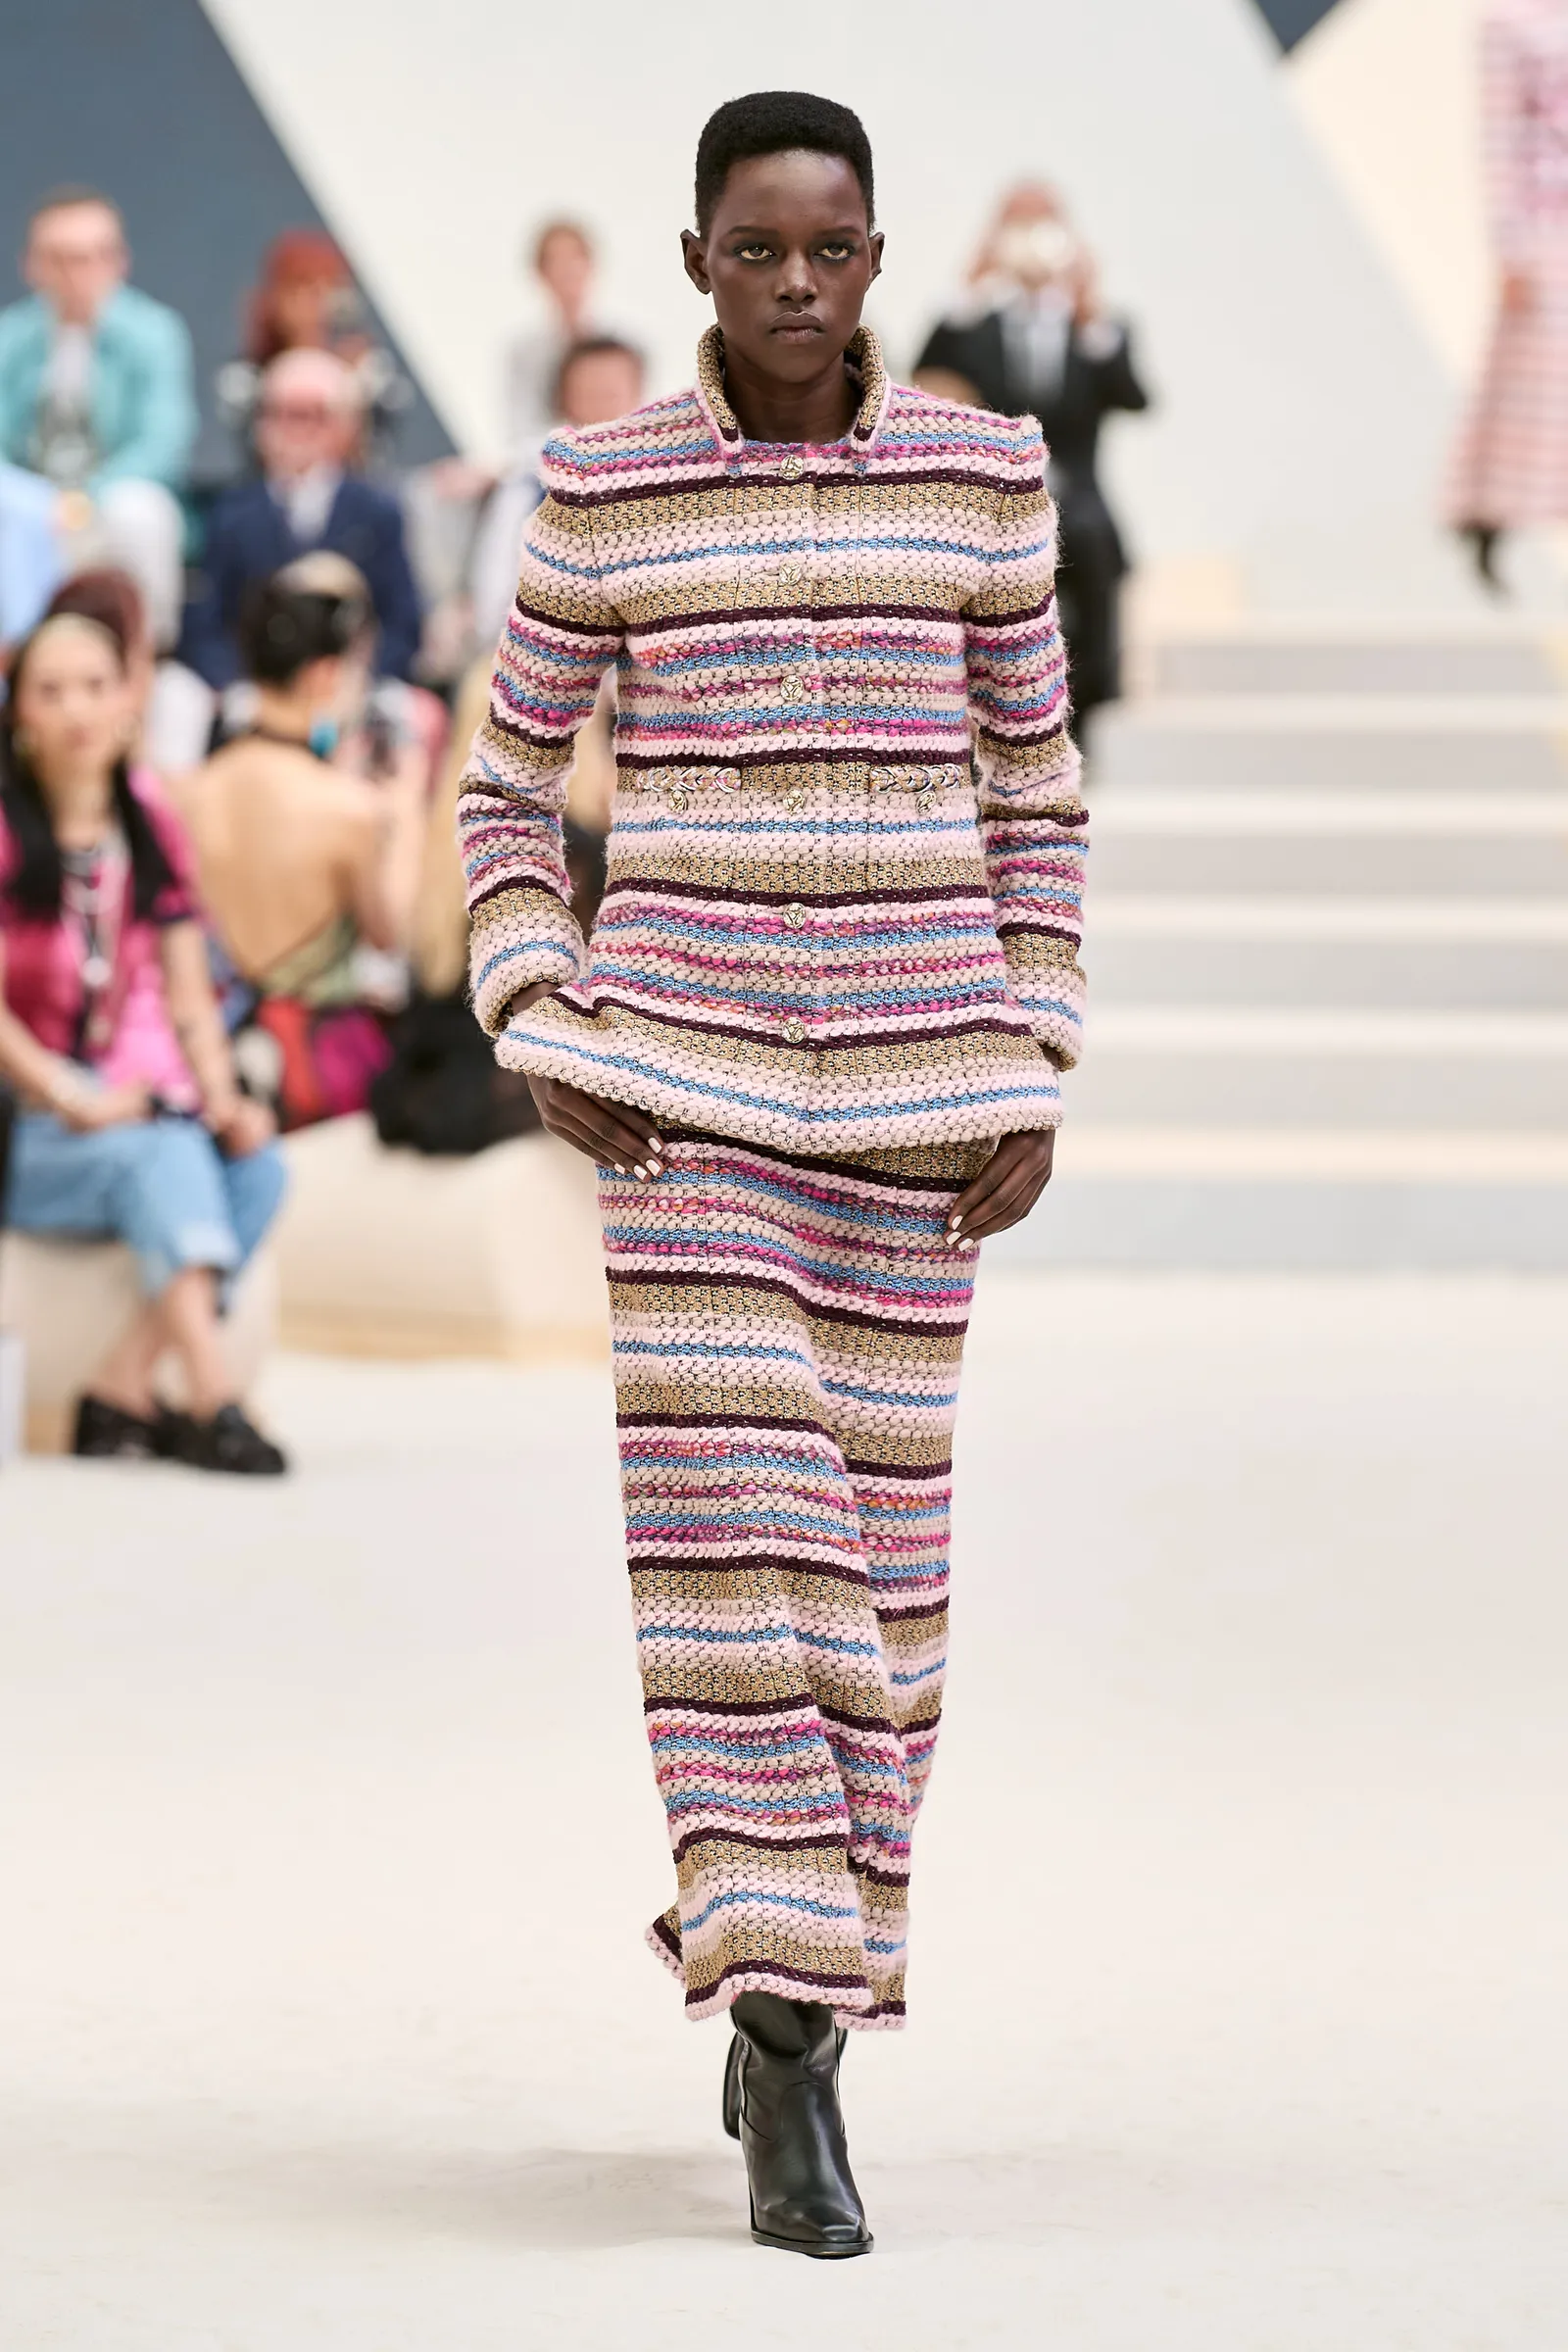 All The Best Looks From Chanel AW22 Haute Couture Runway